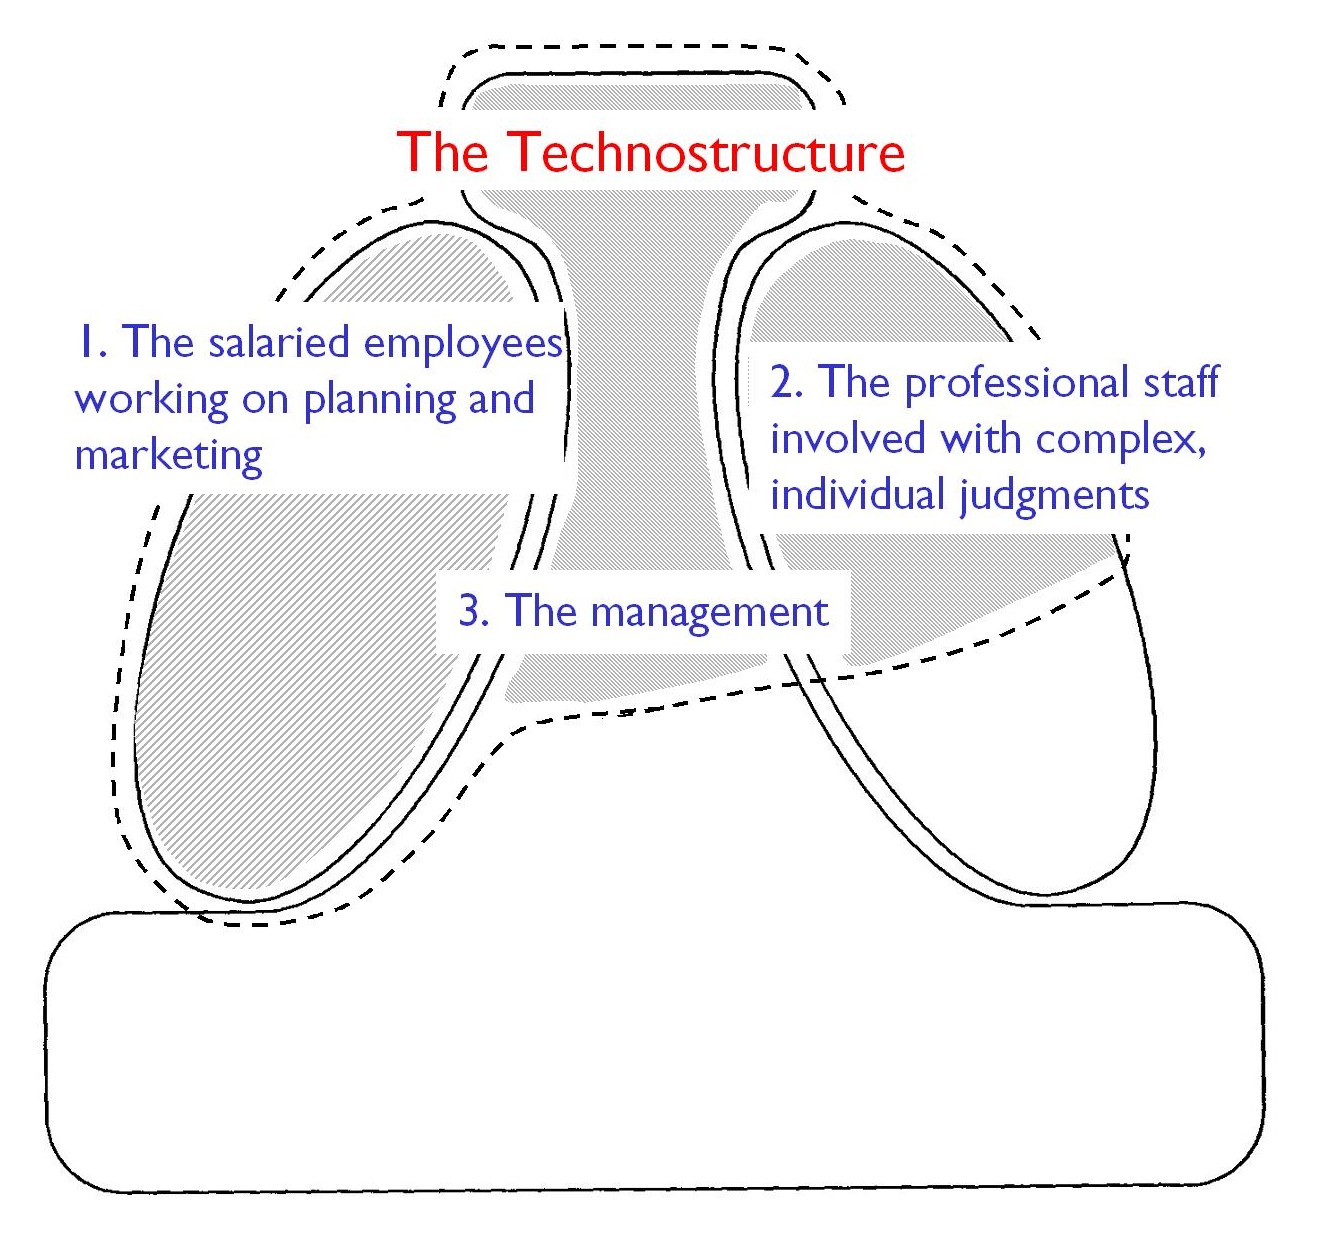 Figure 4: The three parts of the technostructure